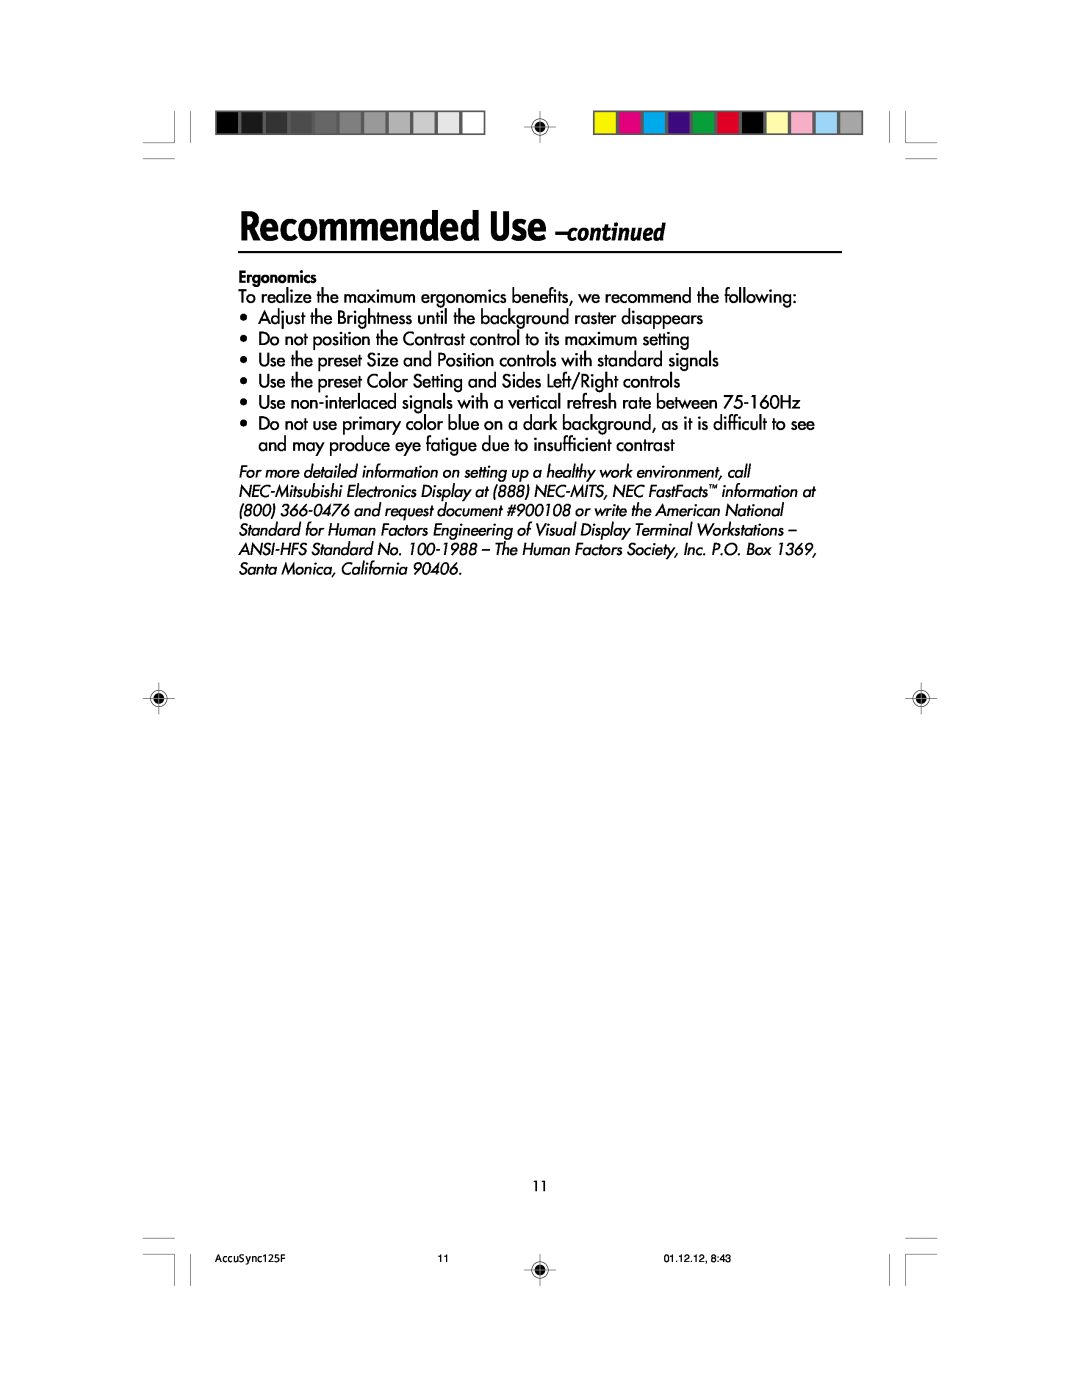 NEC 125F user manual Recommended Use -continued, To realize the maximum ergonomics benefits, we recommend the following 